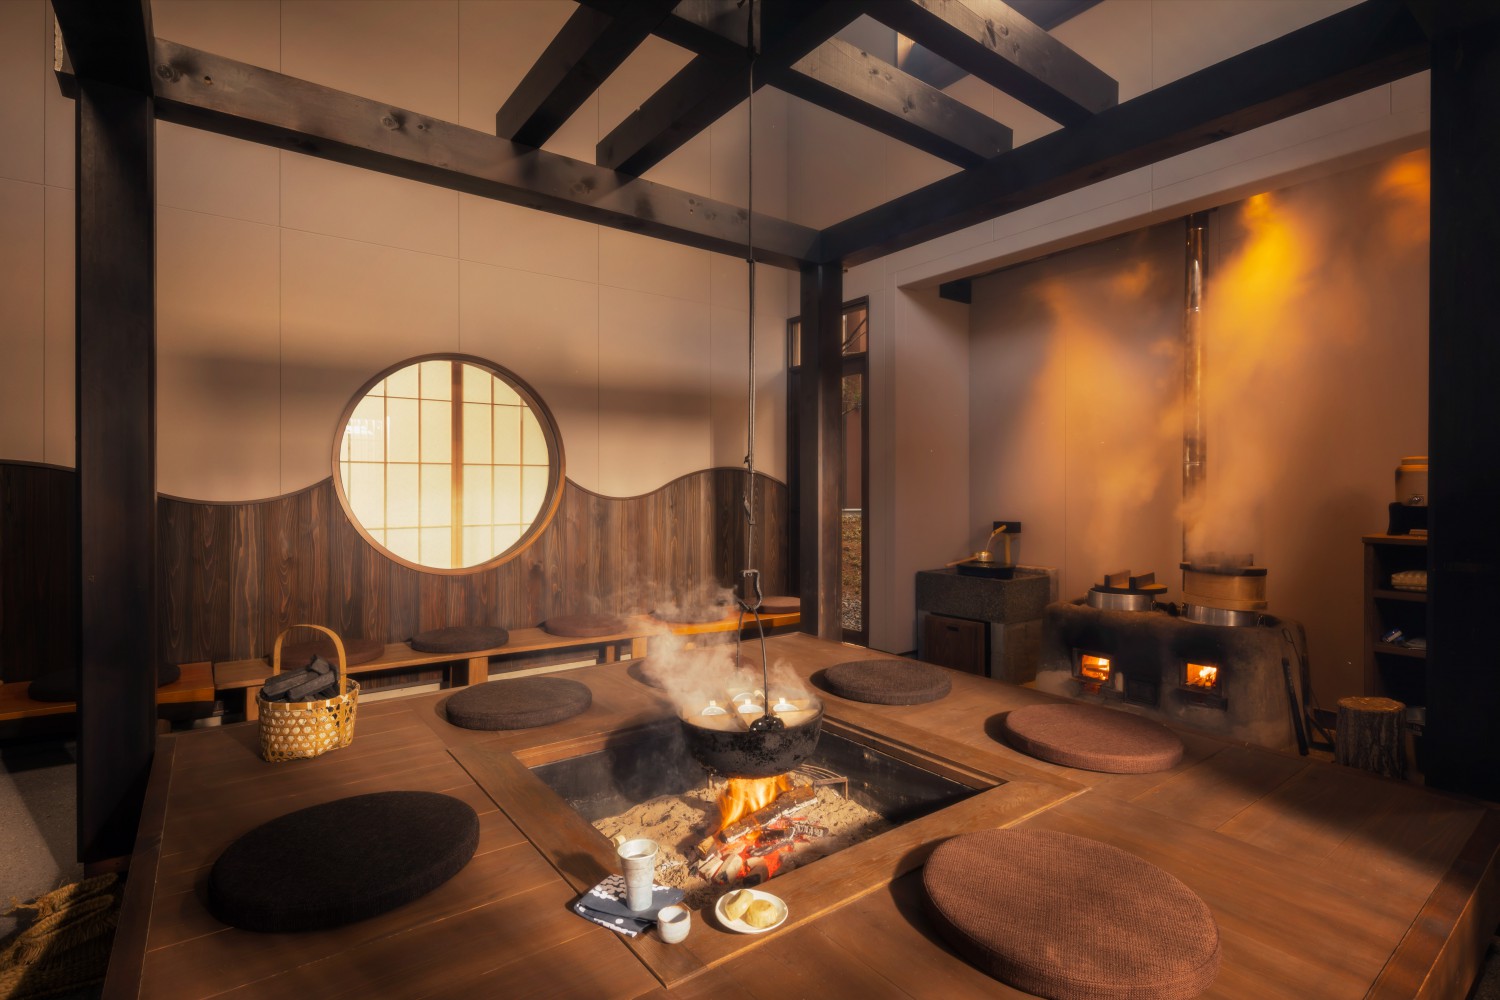 ▲ Doma, hearth, kamado A place where family and friends gather.The sound of burning firewood, the light of orange fire, and the fluctuation of steam rising from the pot ── a special space full of warmth.